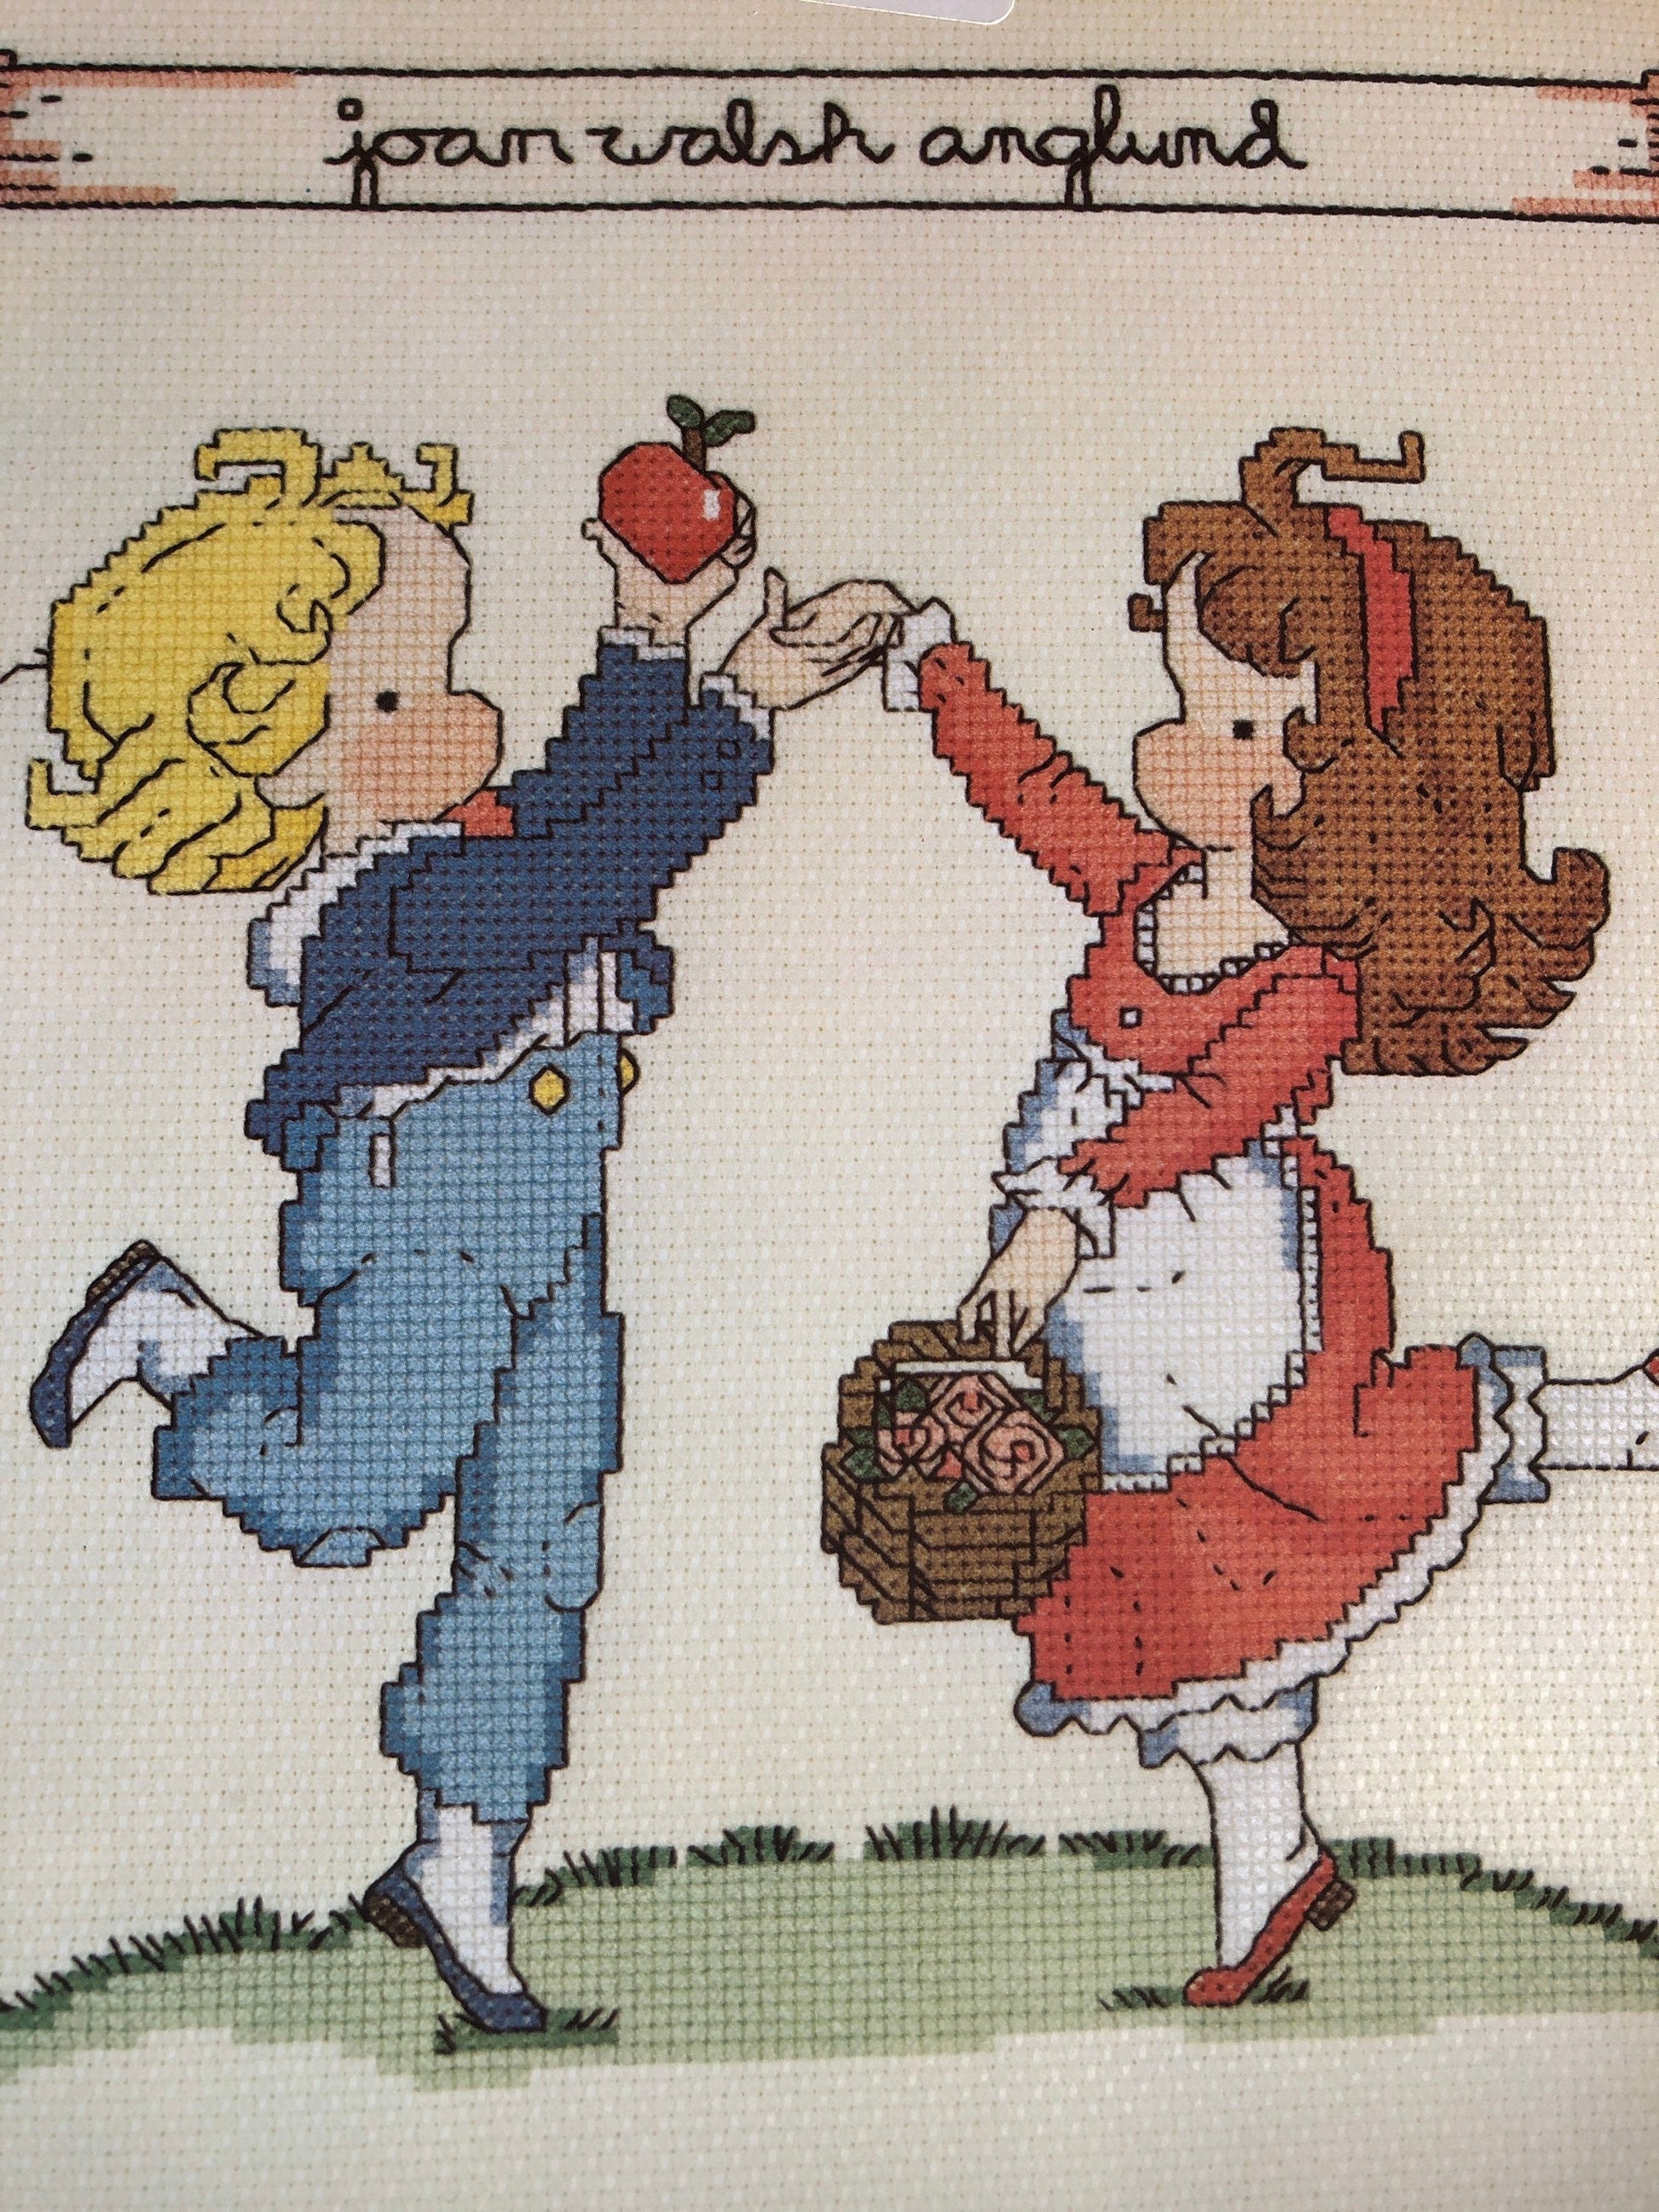 Gloria & Pat, Joan Walsh anglund, Book 17, Vintage 1983, Counted Cross Stitch Chart